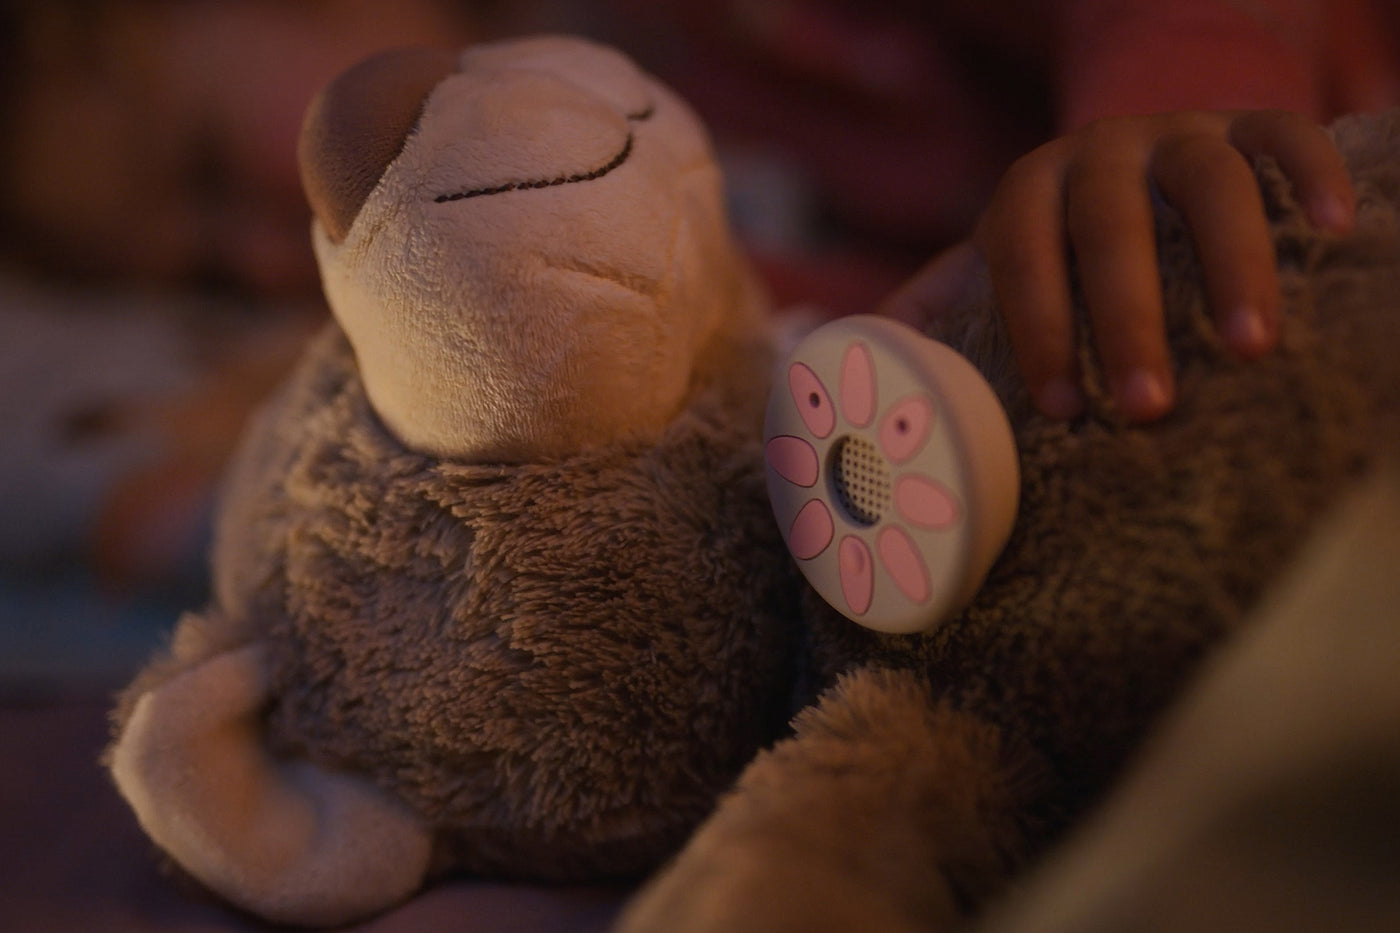 Alecto Baby HeeHee + Teddy bear - Chat button, makes your cuddly toy an interactive friend